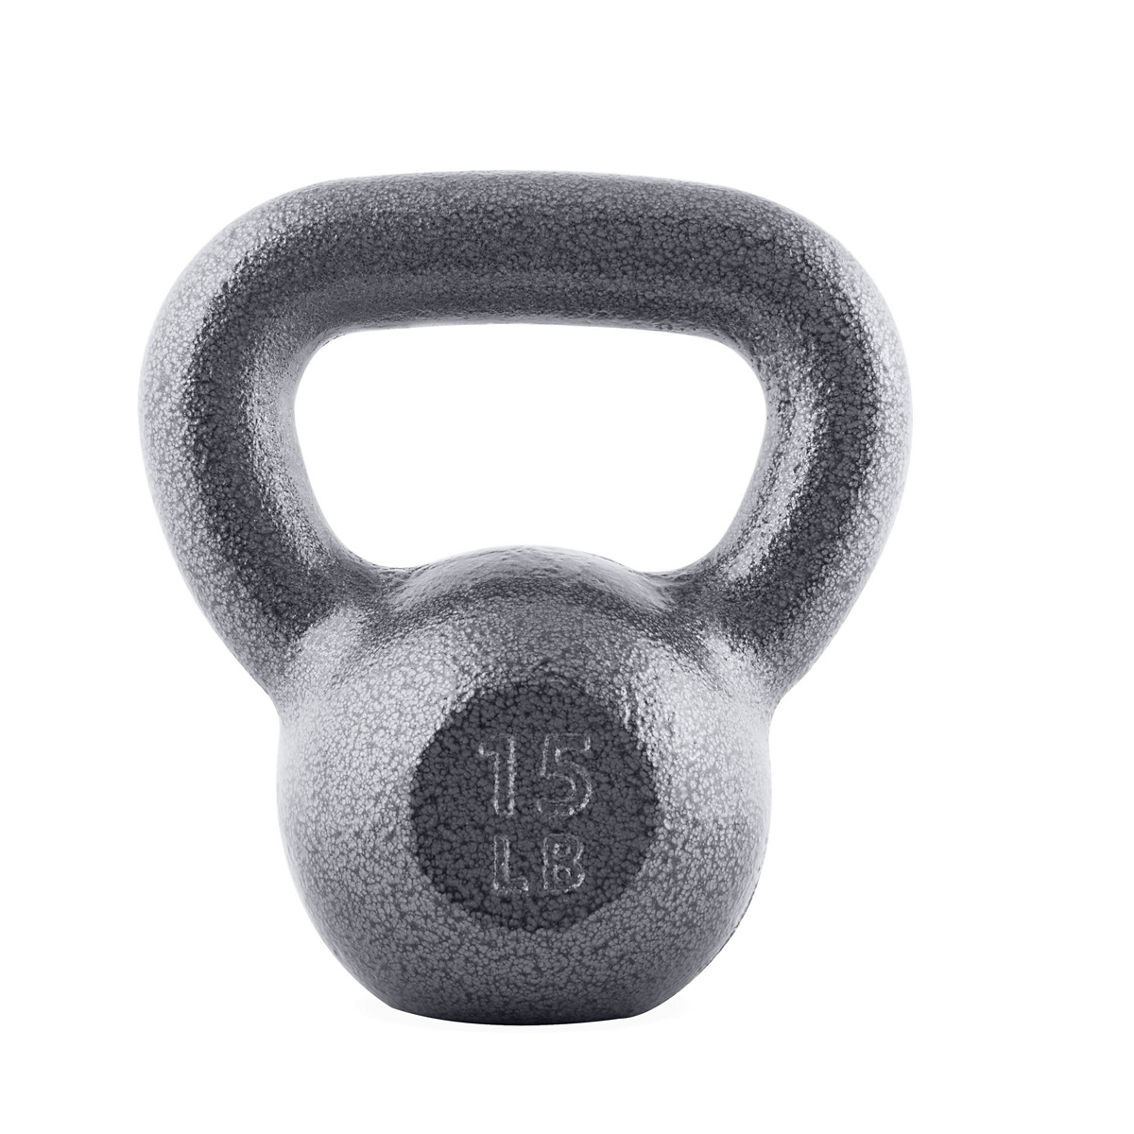 15 Lb. Cast Iron Kettlebell in GRAY - Image 2 of 2